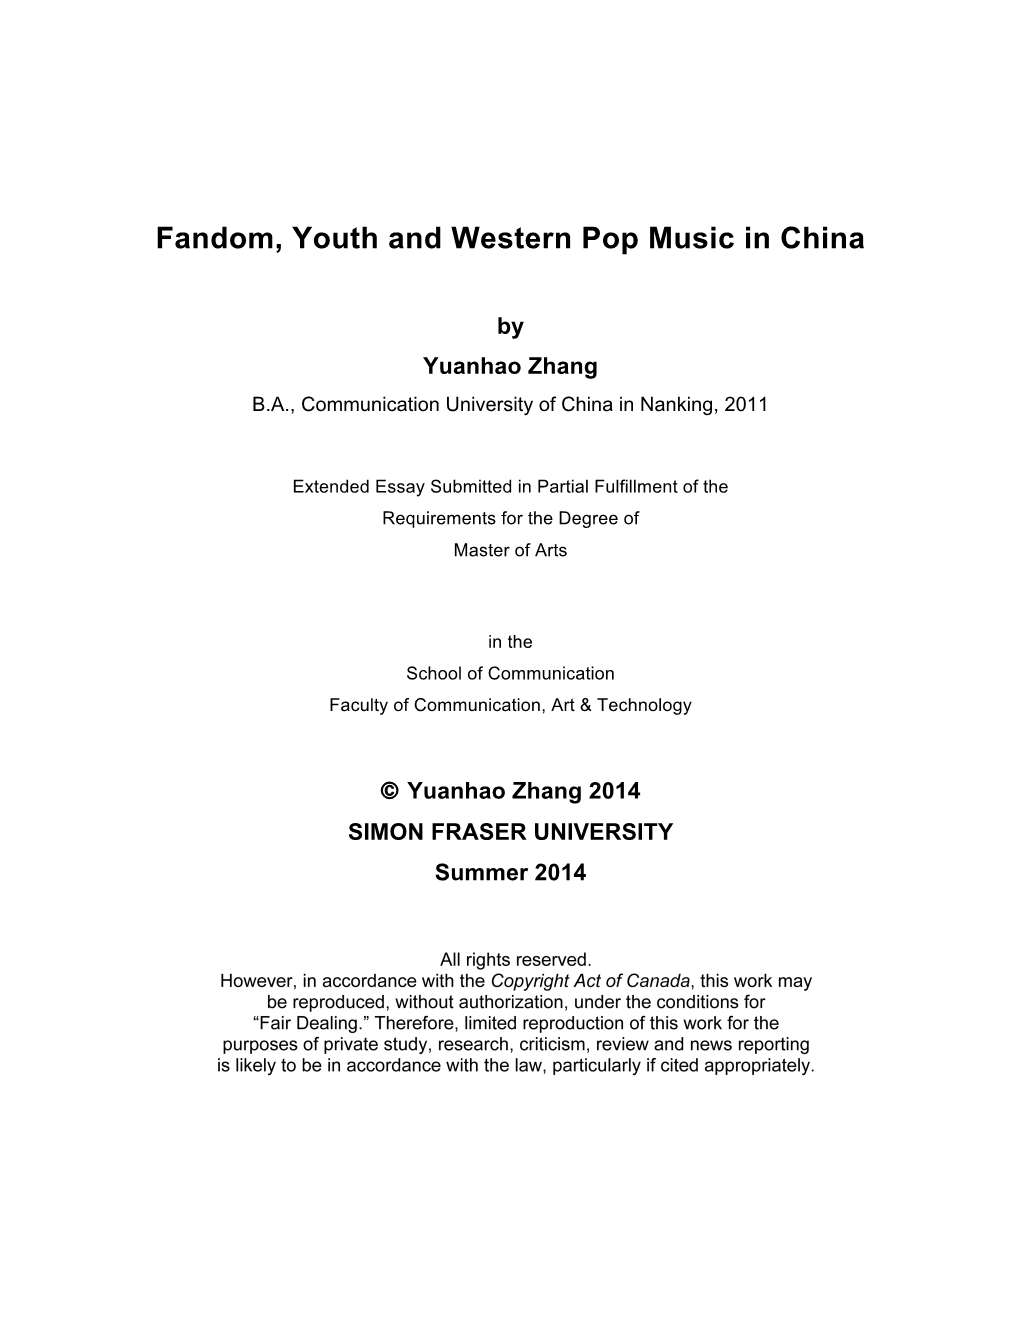 Fandom, Youth and Western Pop Music in China